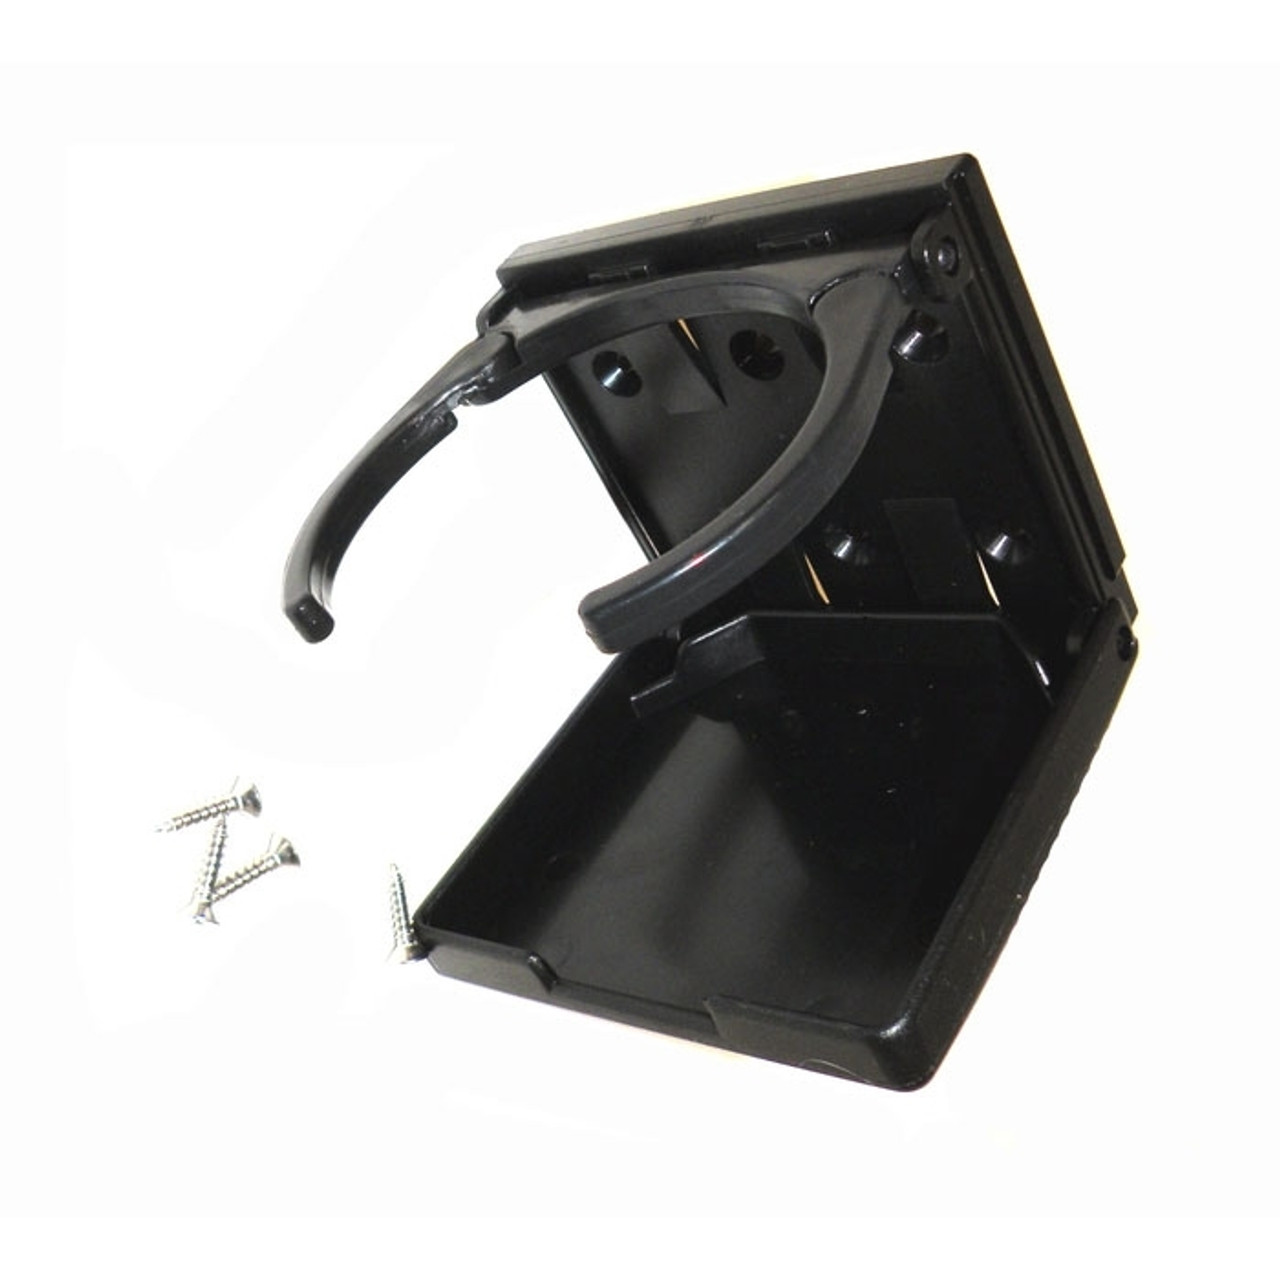 Folding Cup Holder With Articulating Arms | Van Cafe